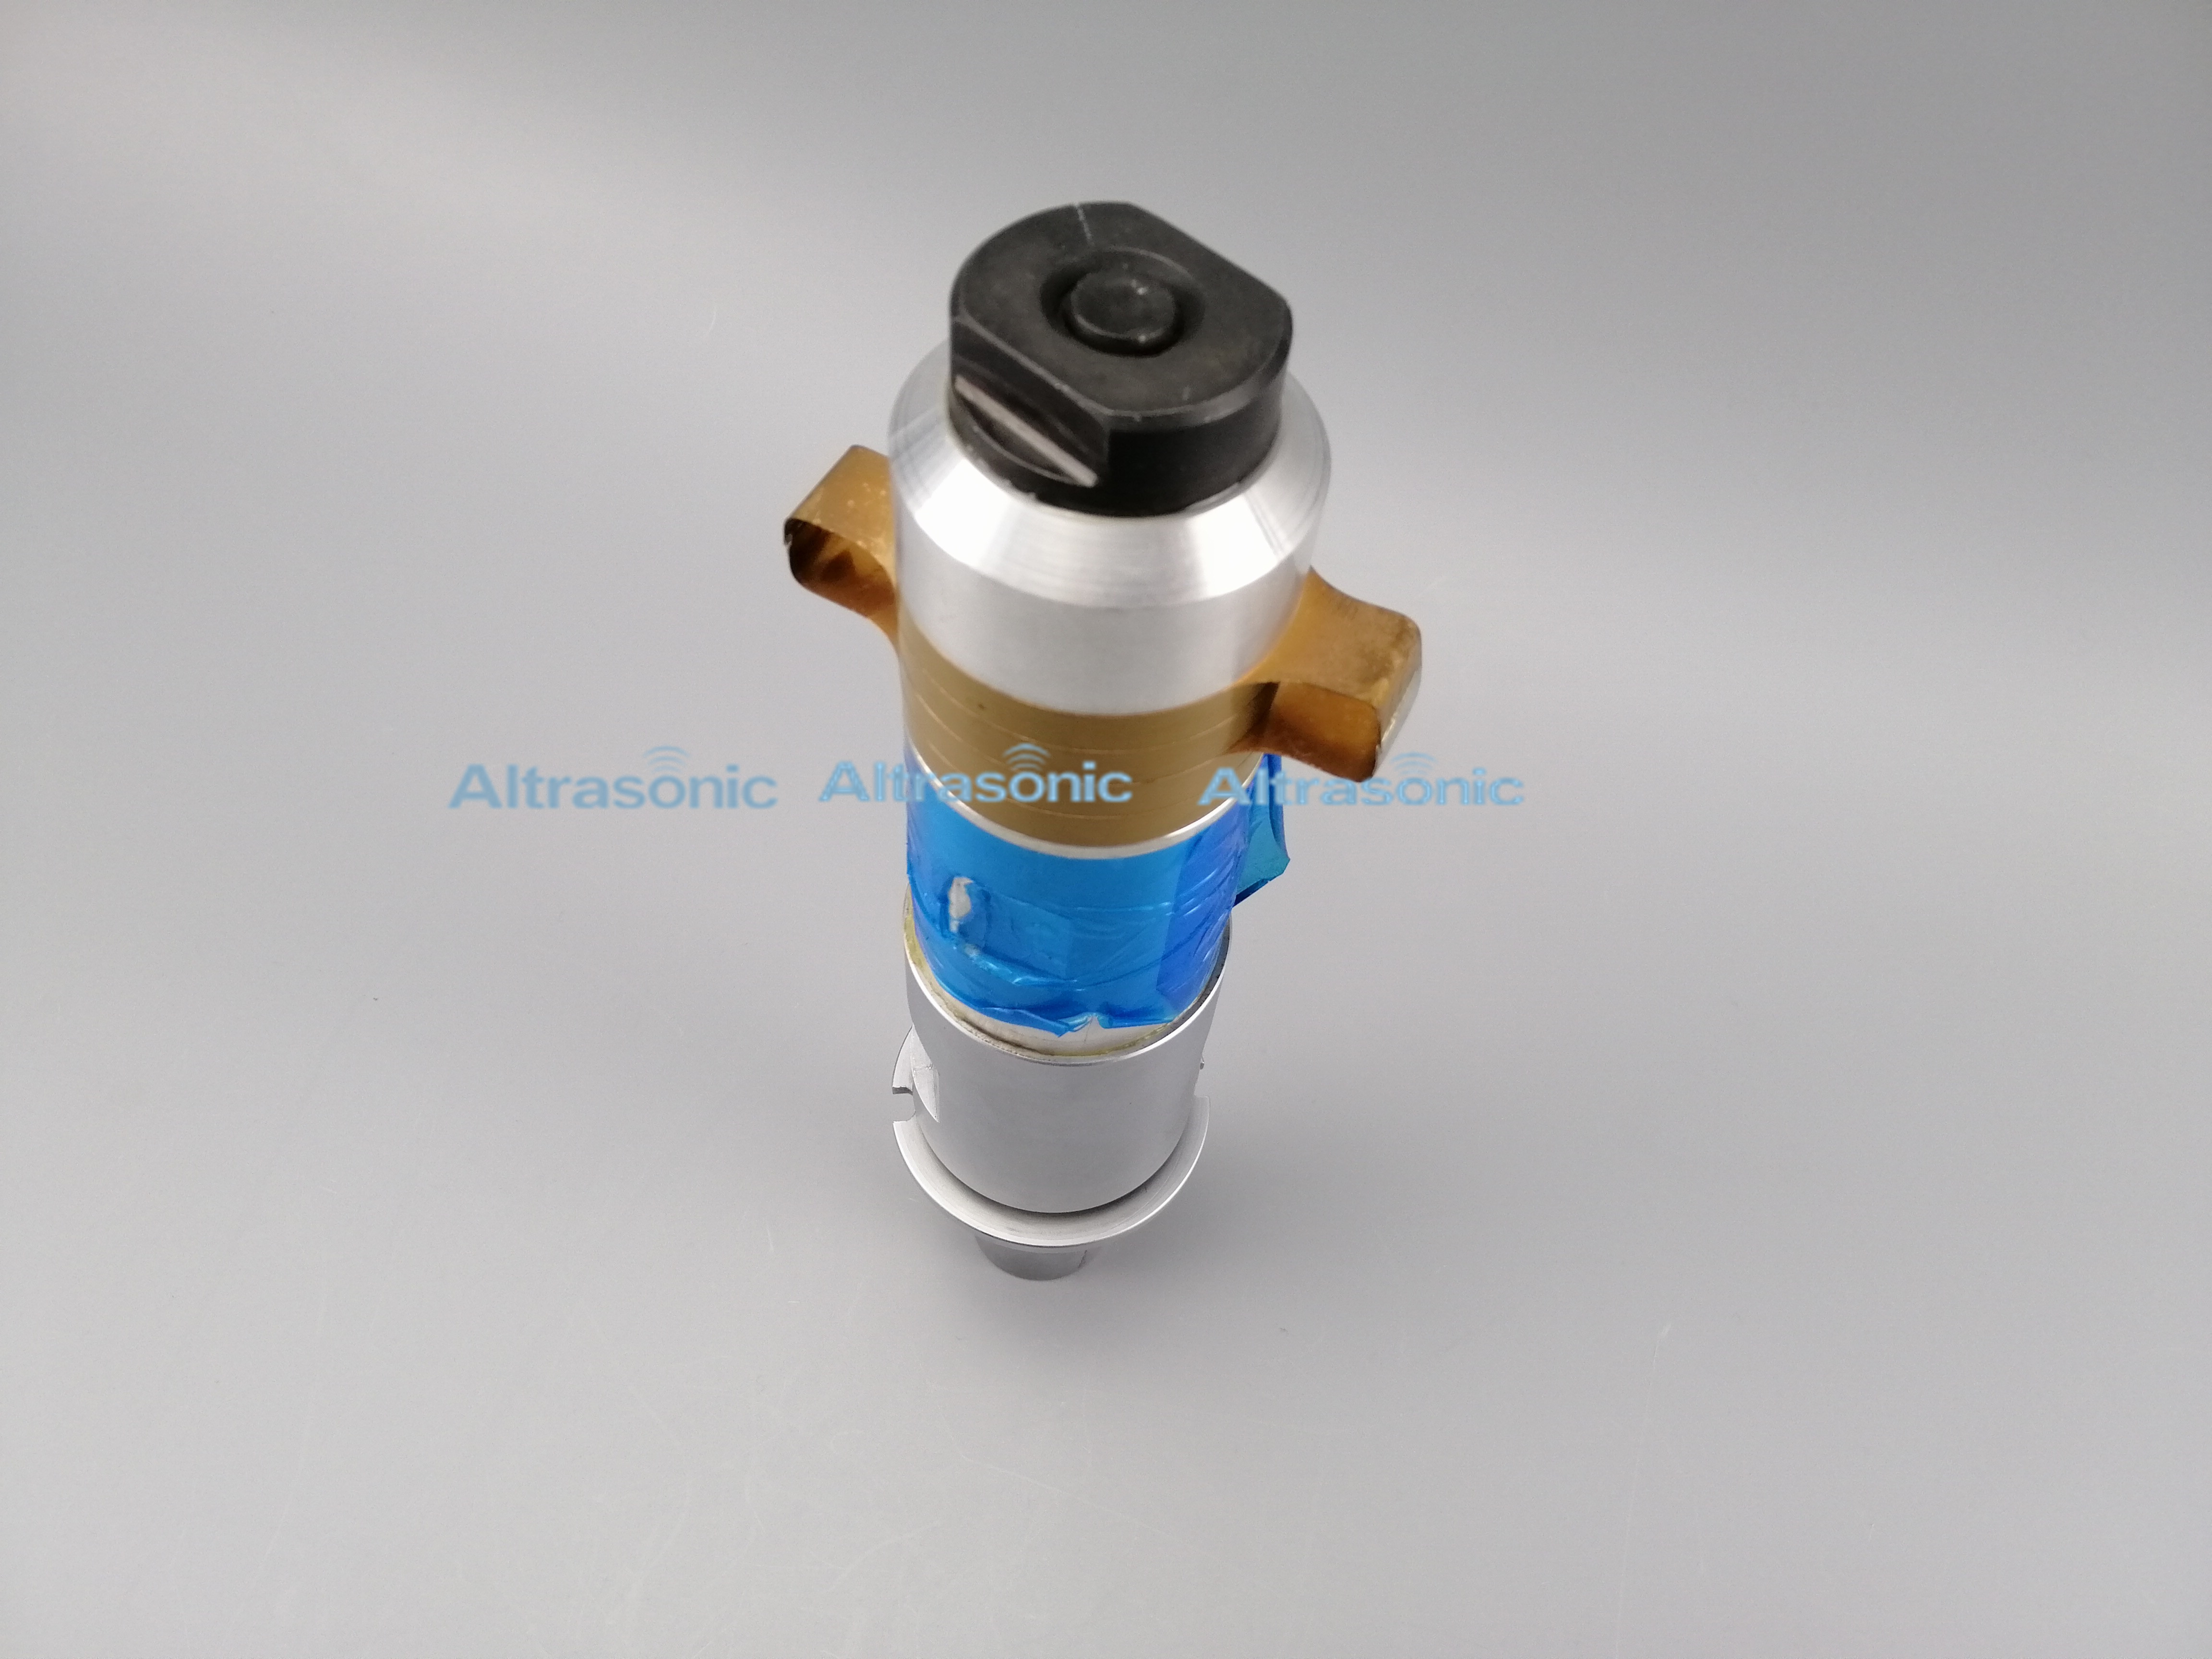  Booster Ultrasonic Welding Transducer , High Frequency Piezoelectric Transducer 20K Manufactures